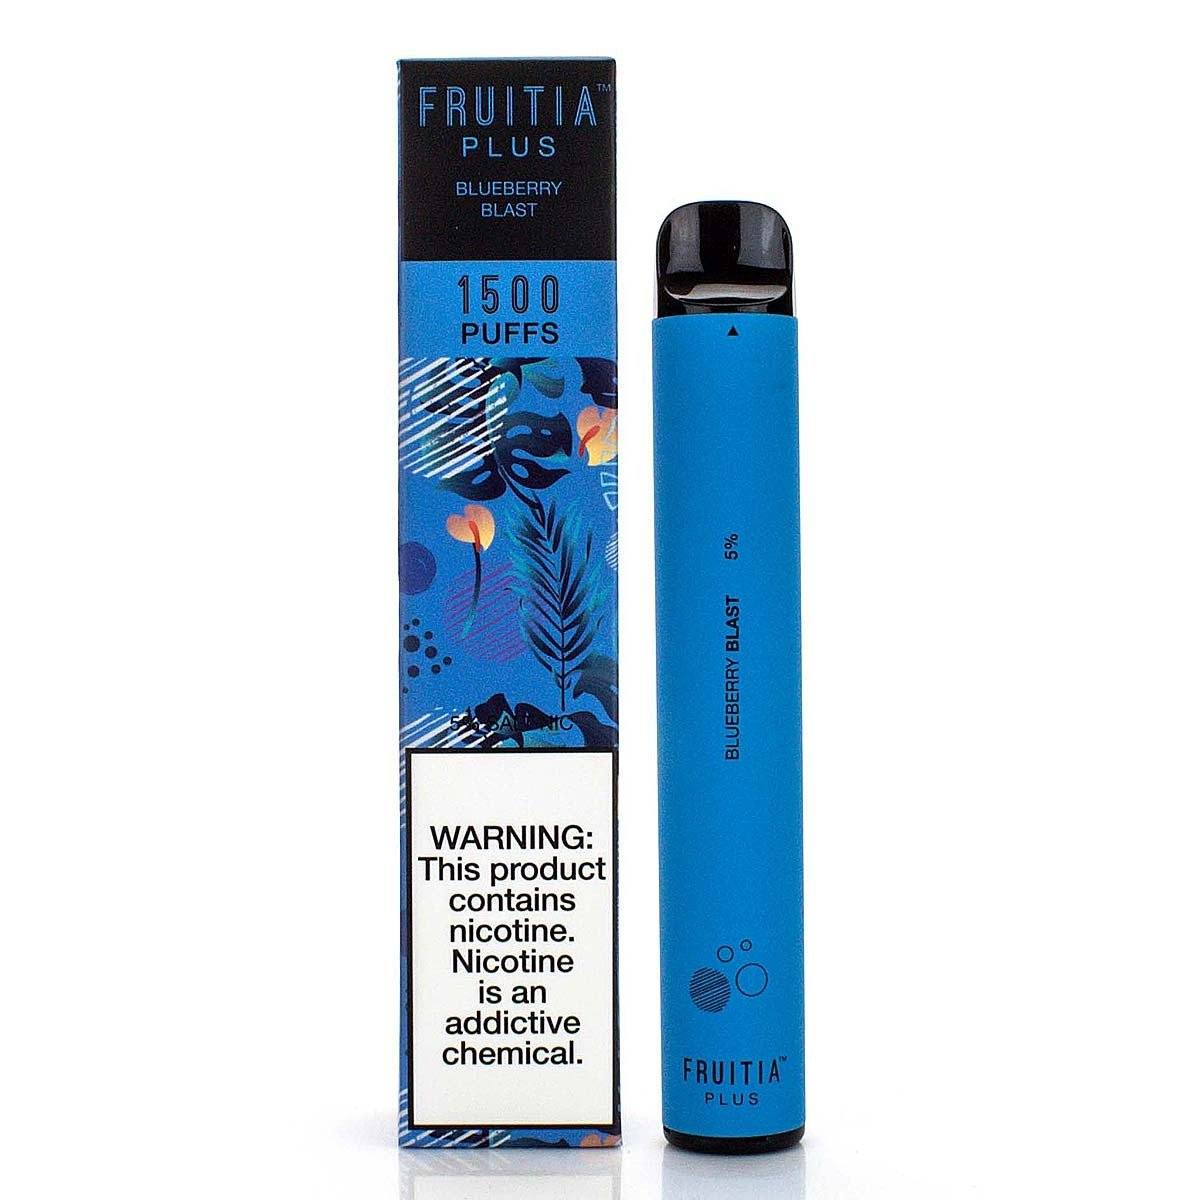 Fruitia Plus Disposable Device | 1500 Puffs Blueberry Blast with Packaging